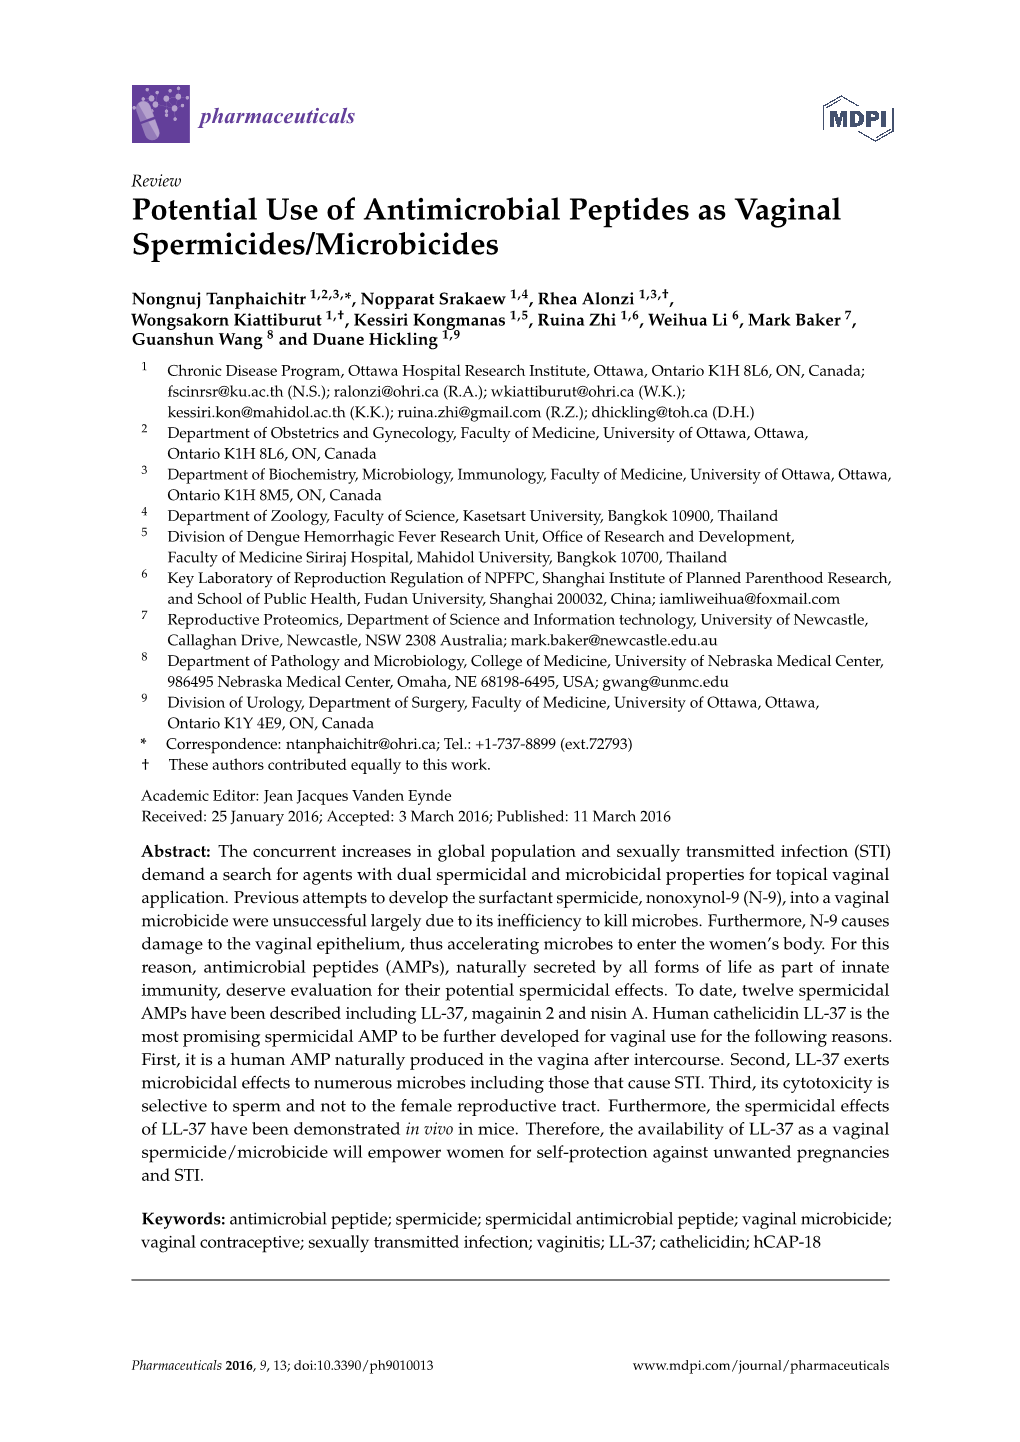 Potential Use of Antimicrobial Peptides As Vaginal Spermicides/Microbicides